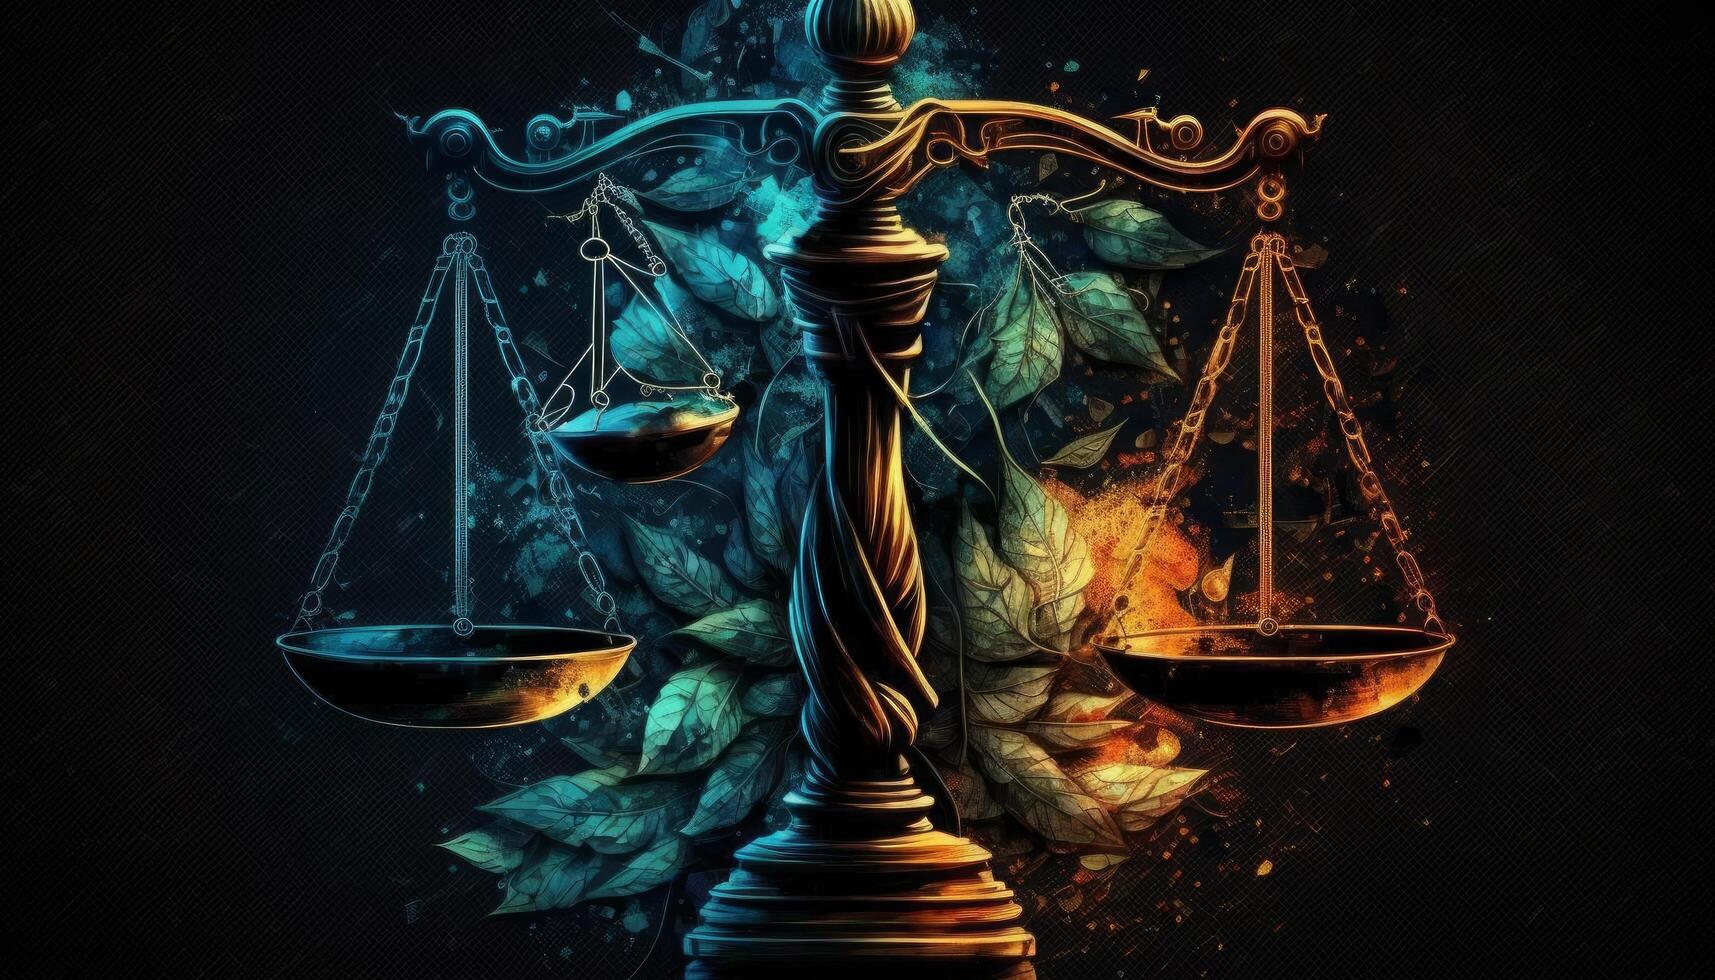 scales of justice graphic illustration vector image photo